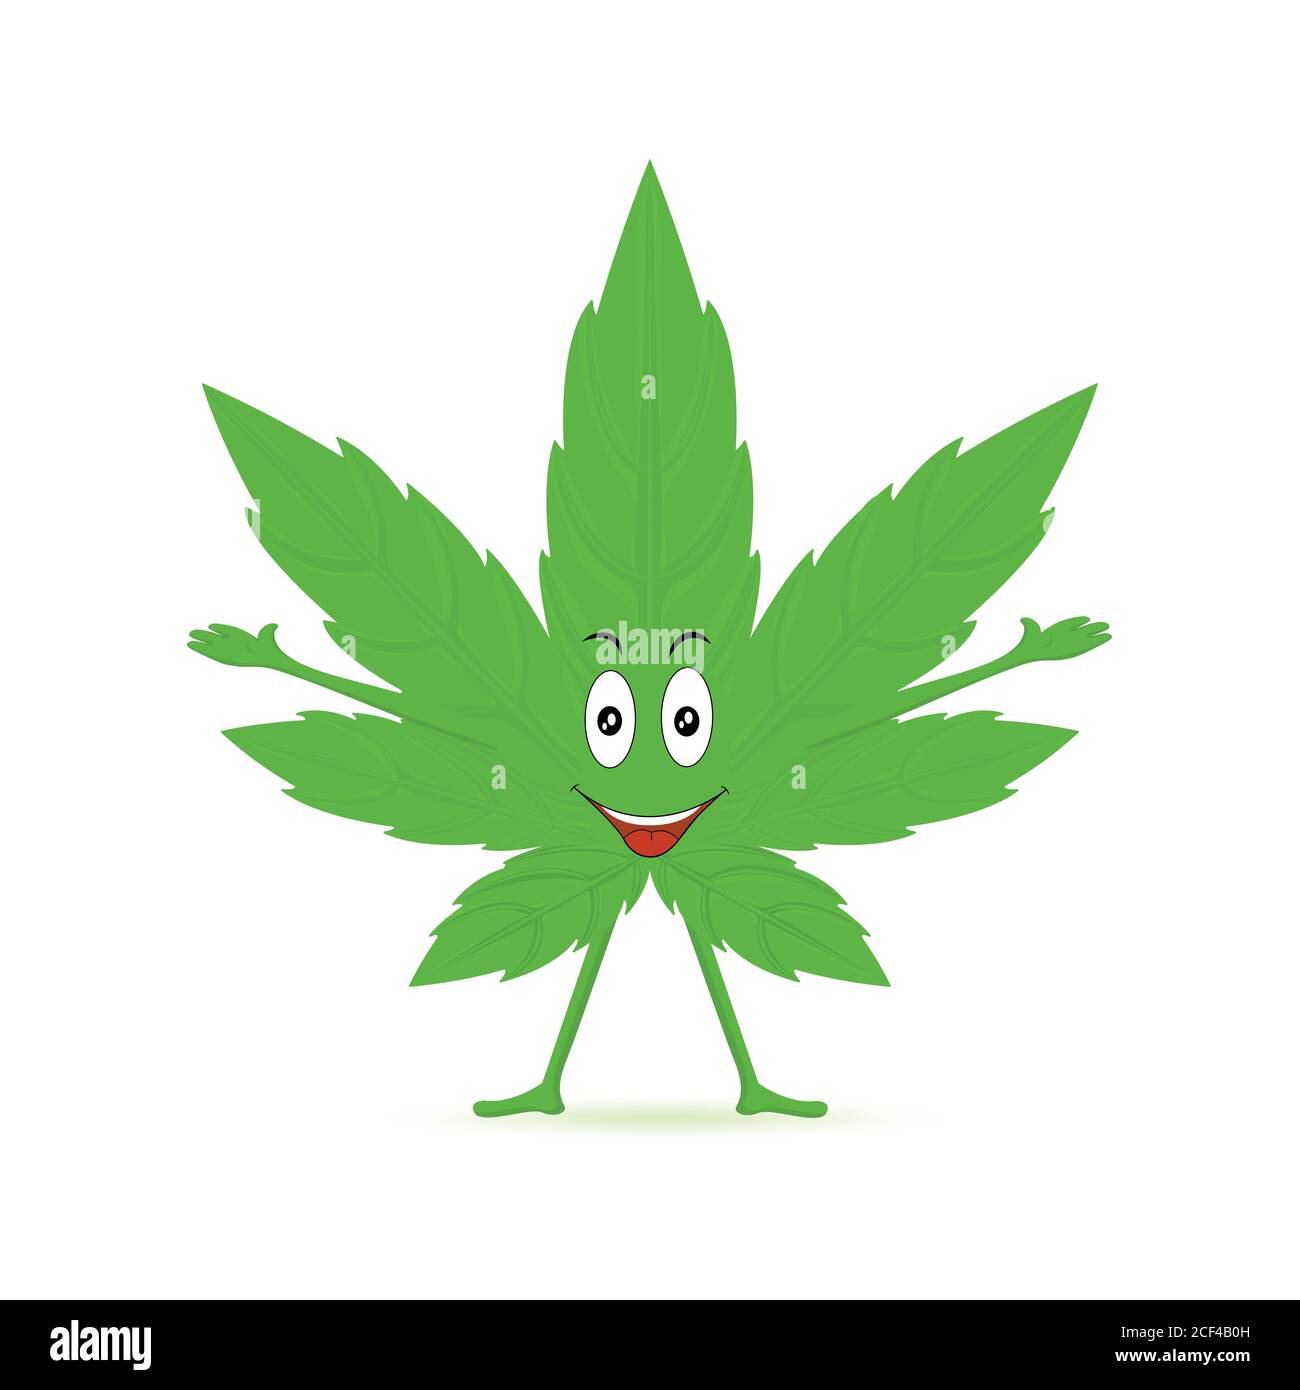 cannabis stickers cool ganja Lot of weed stickers hemp leaves cannabis leaves funny drawings and characters fun